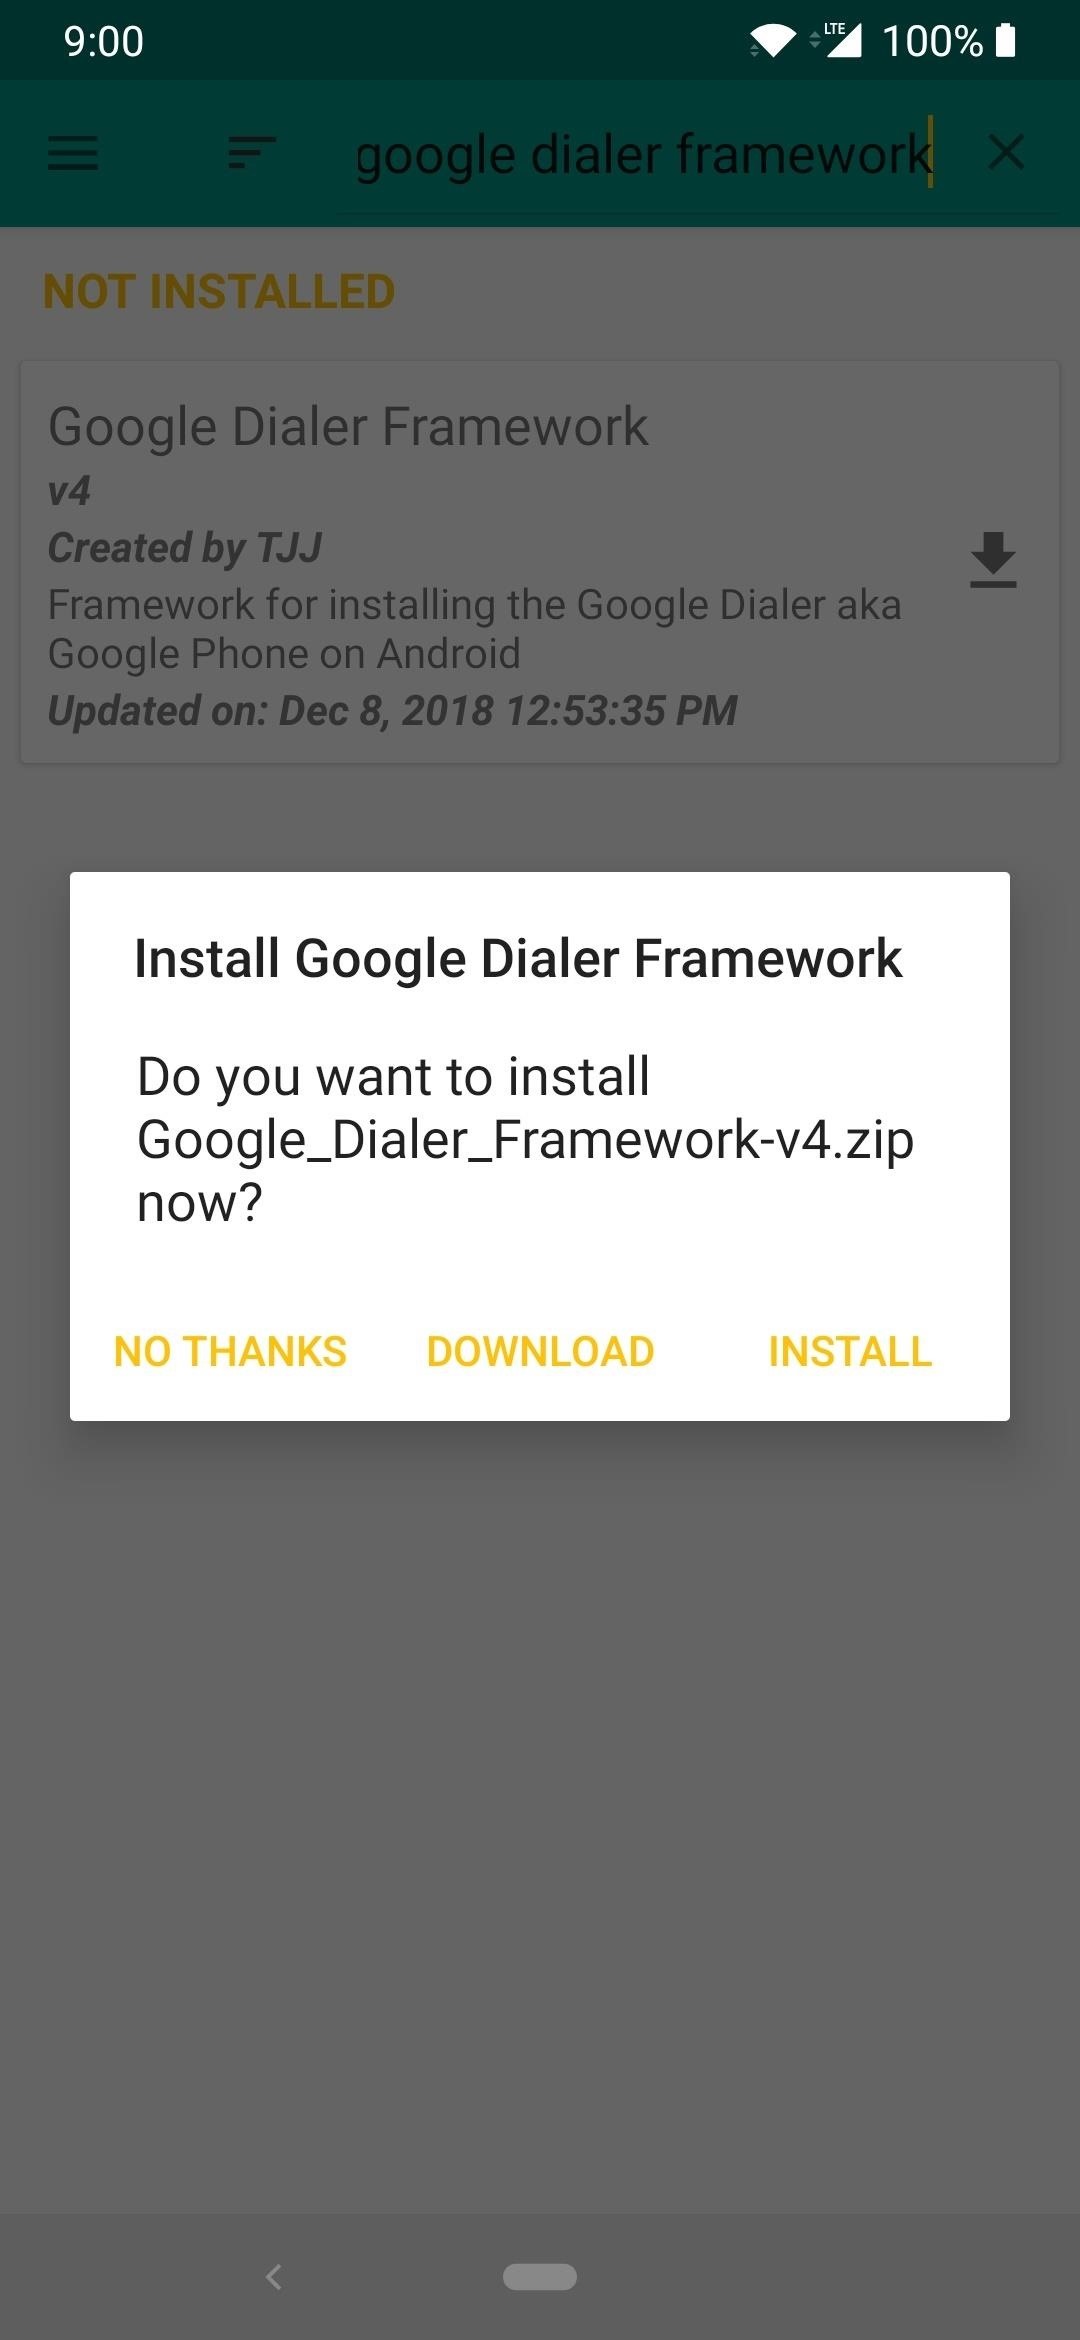 How to Get the Google Phone App with Spam Blocking & Business Search on Any Android Phone